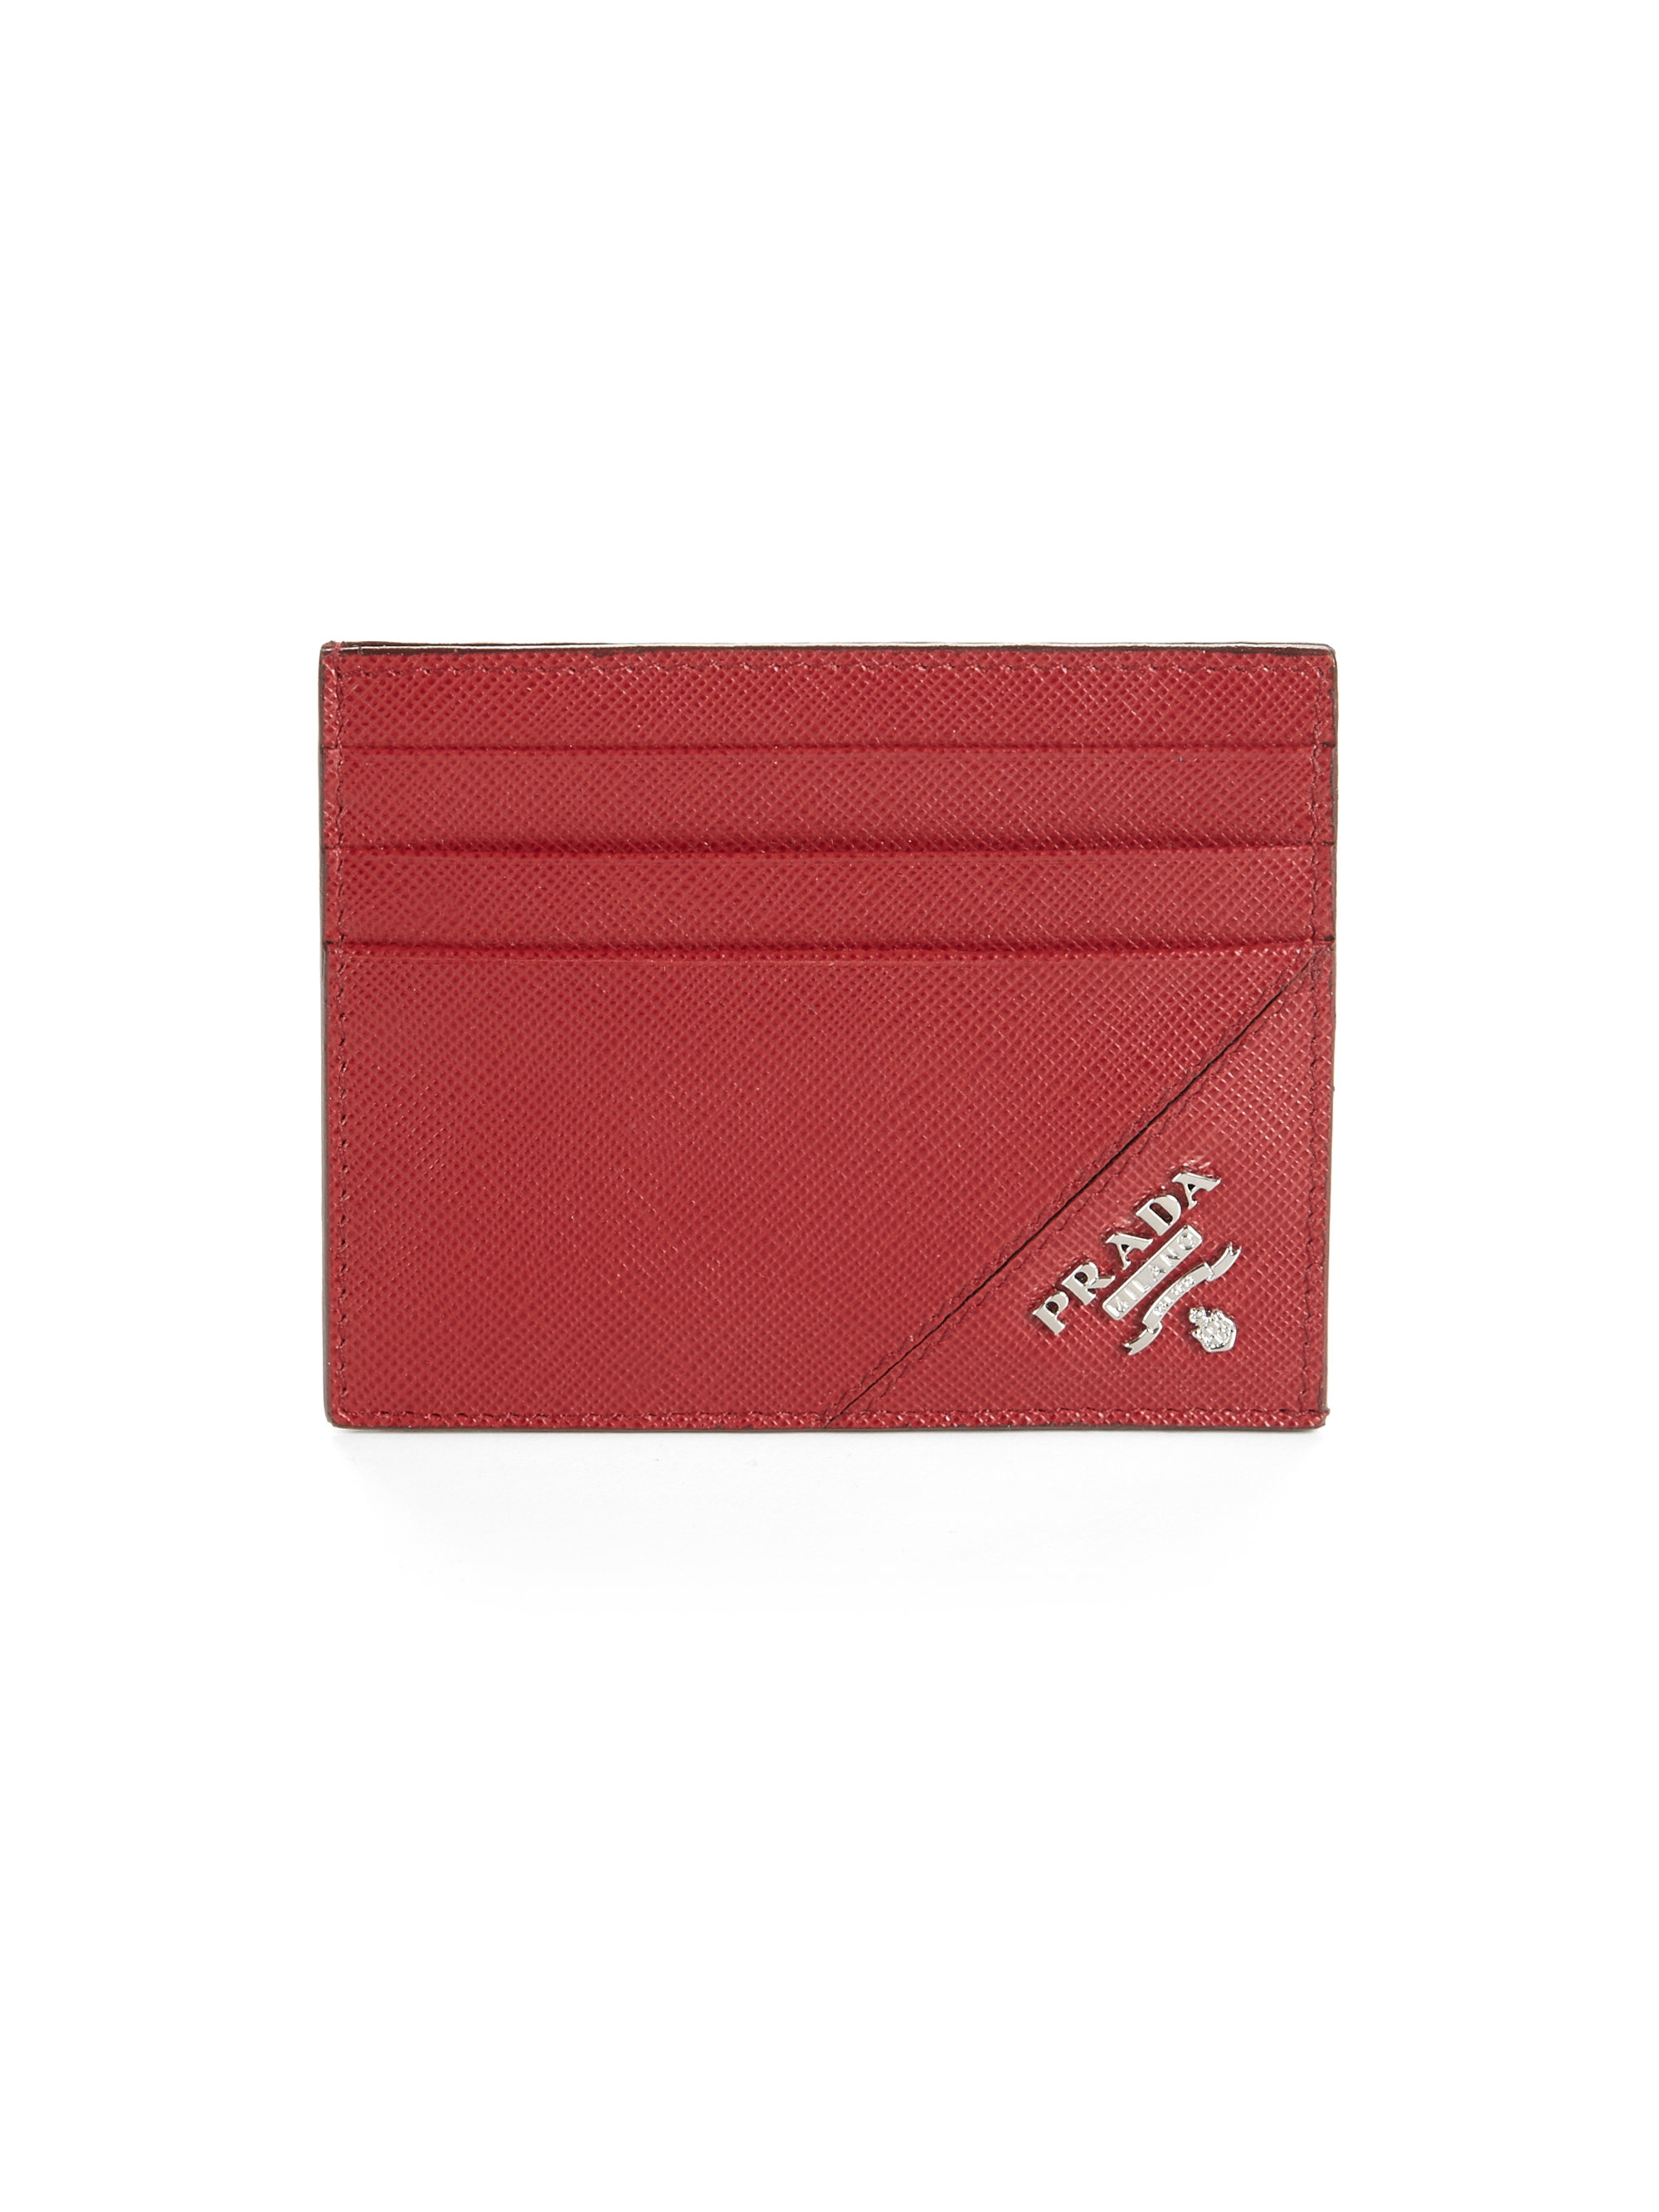 Lyst - Prada Saffiano Leather Credit Card Case in Red for Men